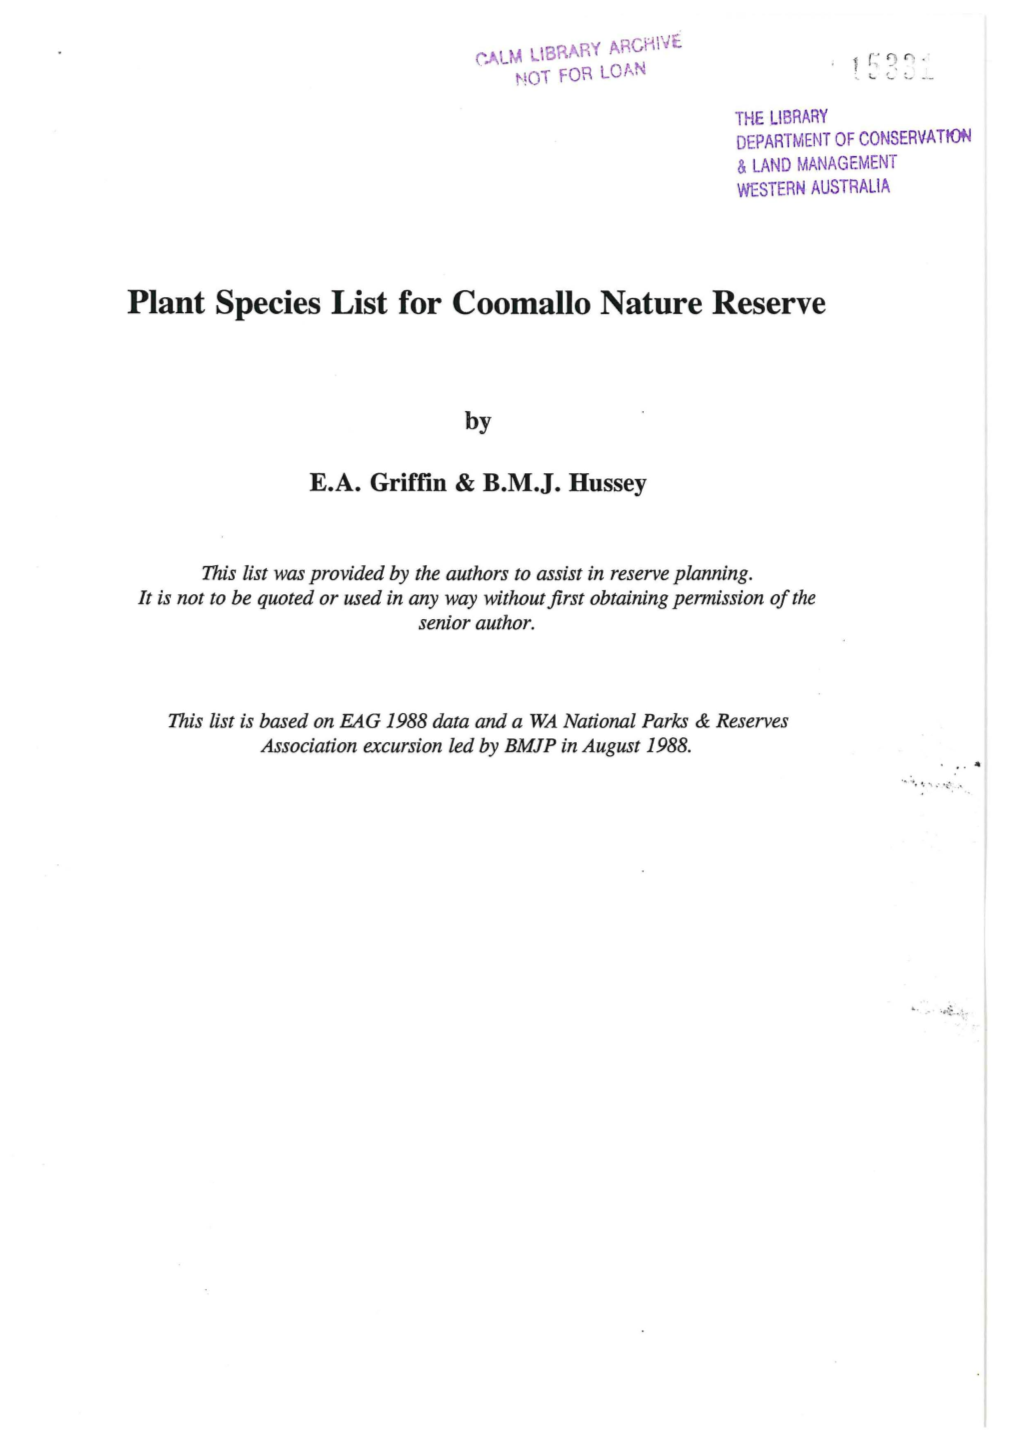 Plant Species List for Coomallo Nature Reserve